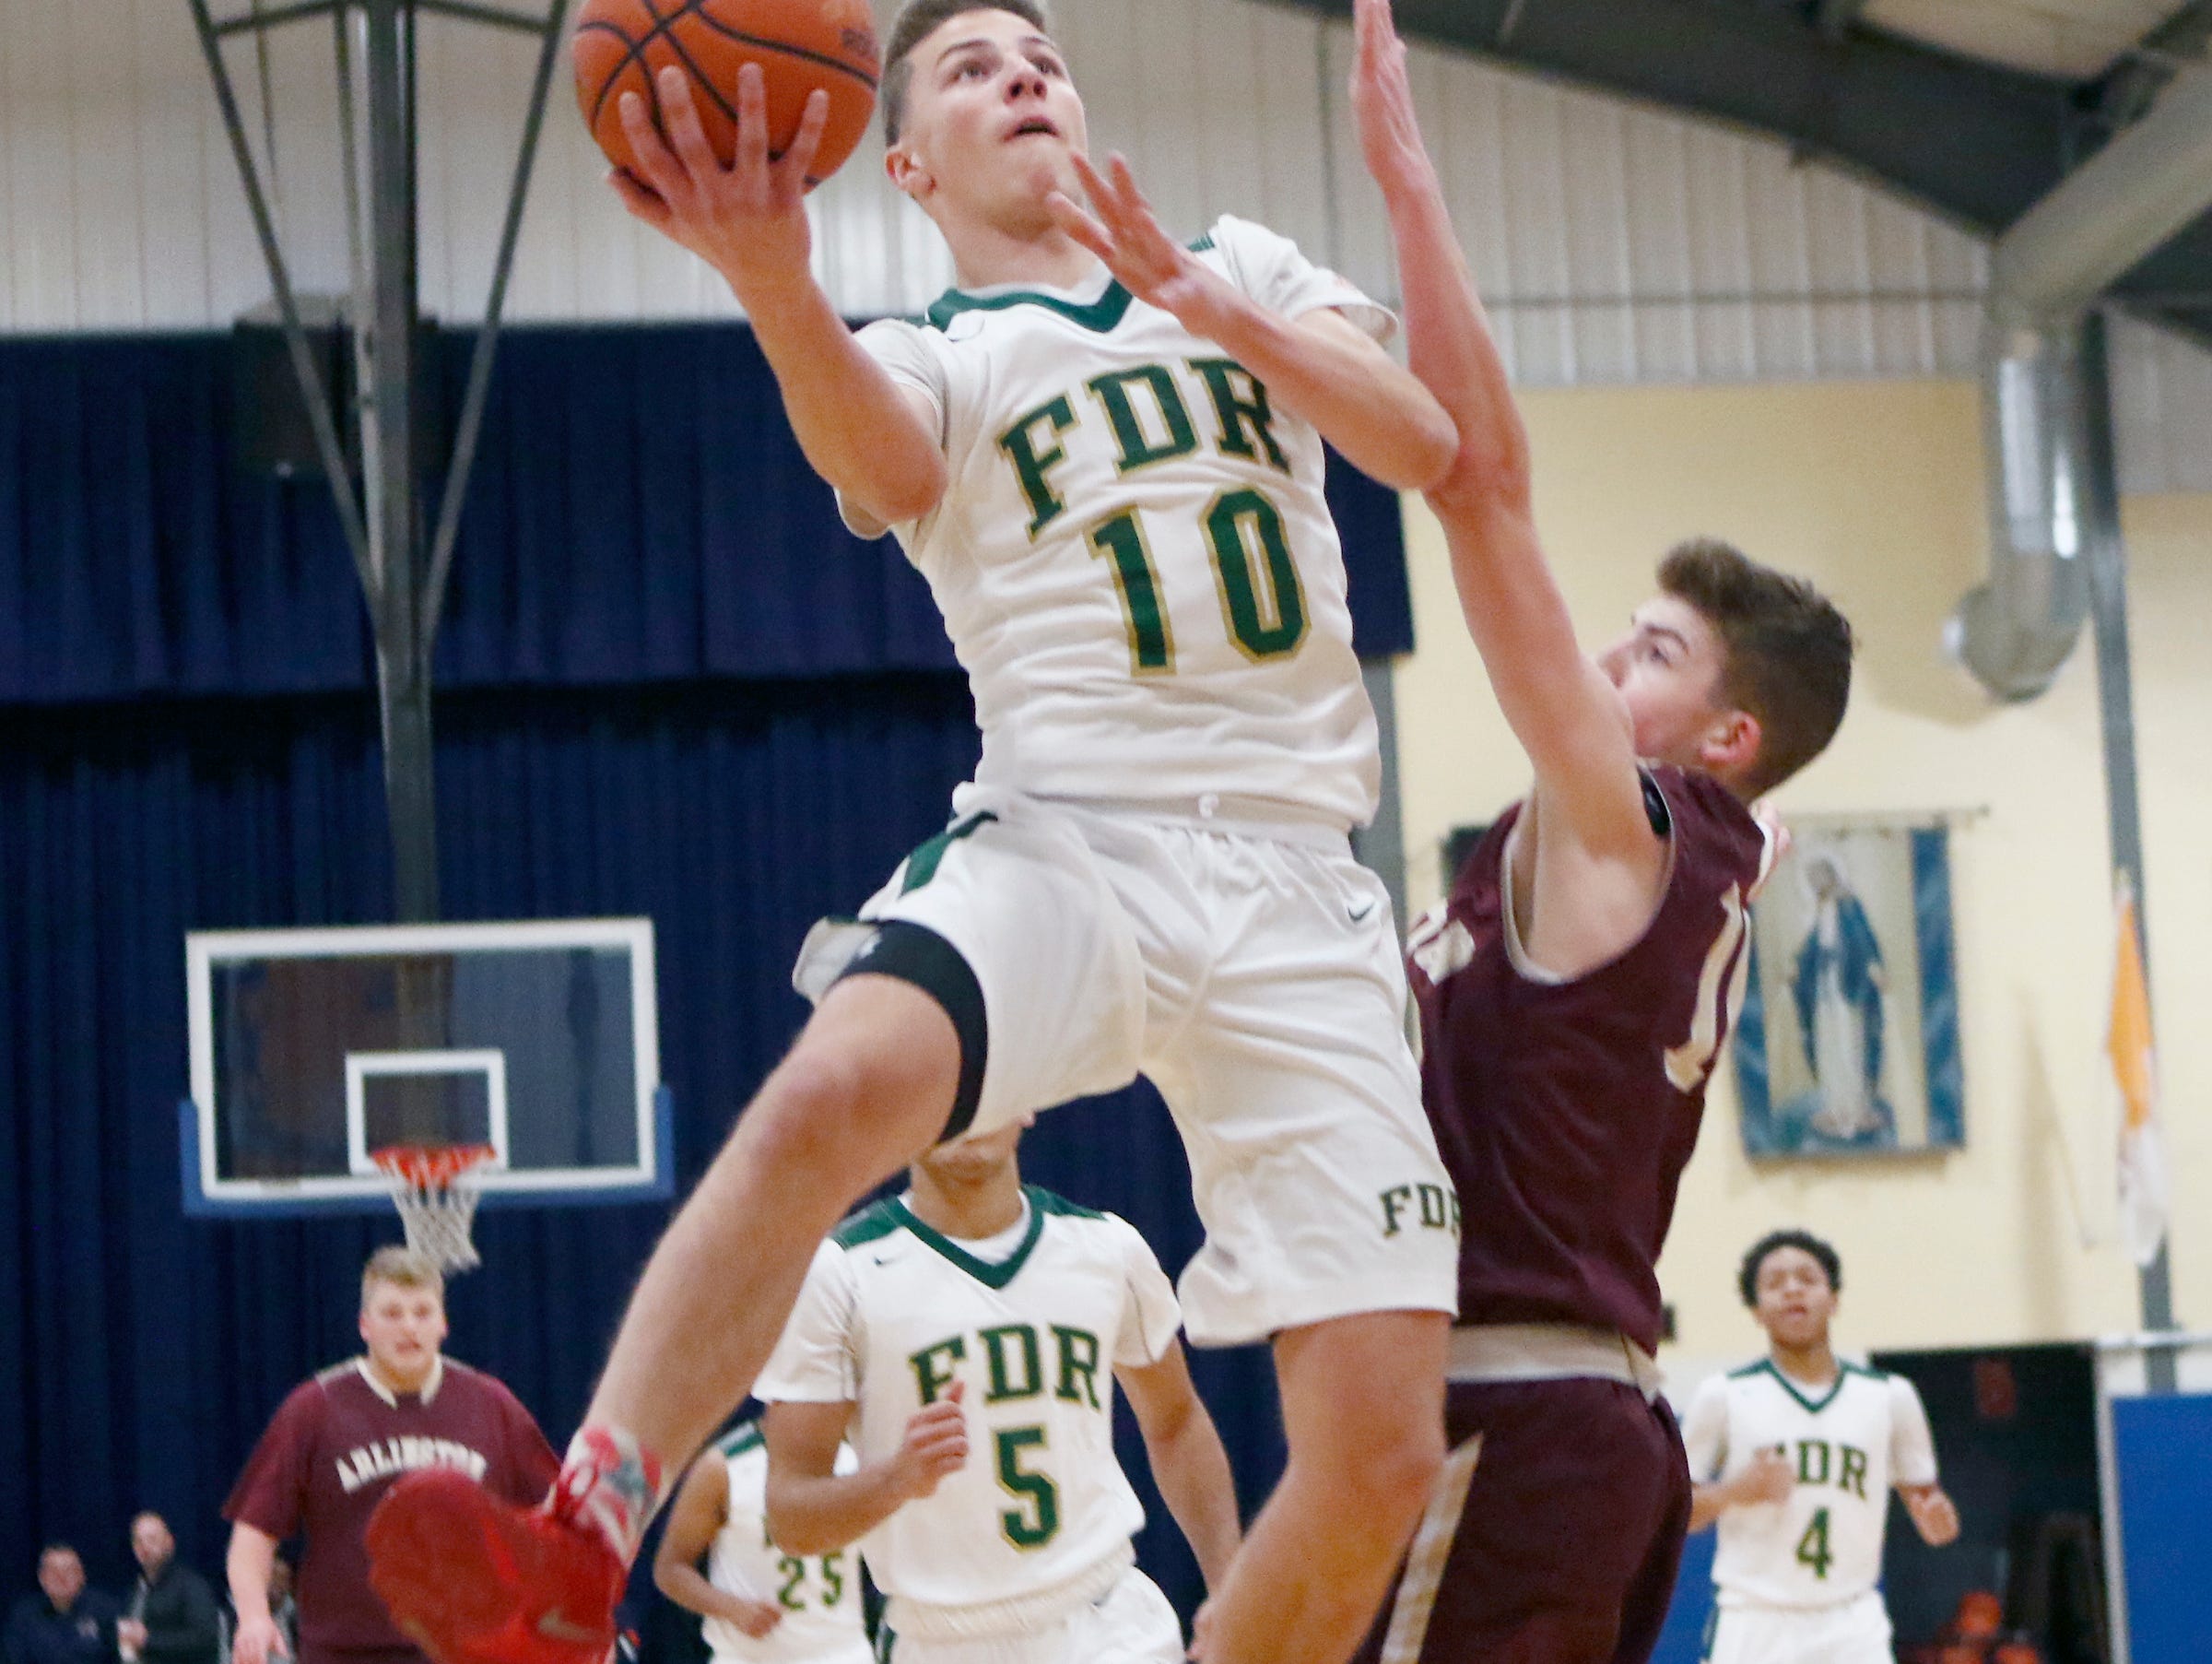 FDR's Ethan Hart (10) drives to the basket against Arlington in the consolation game of the Duane Davis memorial basketball tournament at Our Lady of Lourdes High School in Poughkeepsie on Saturday, December 31, 2016.